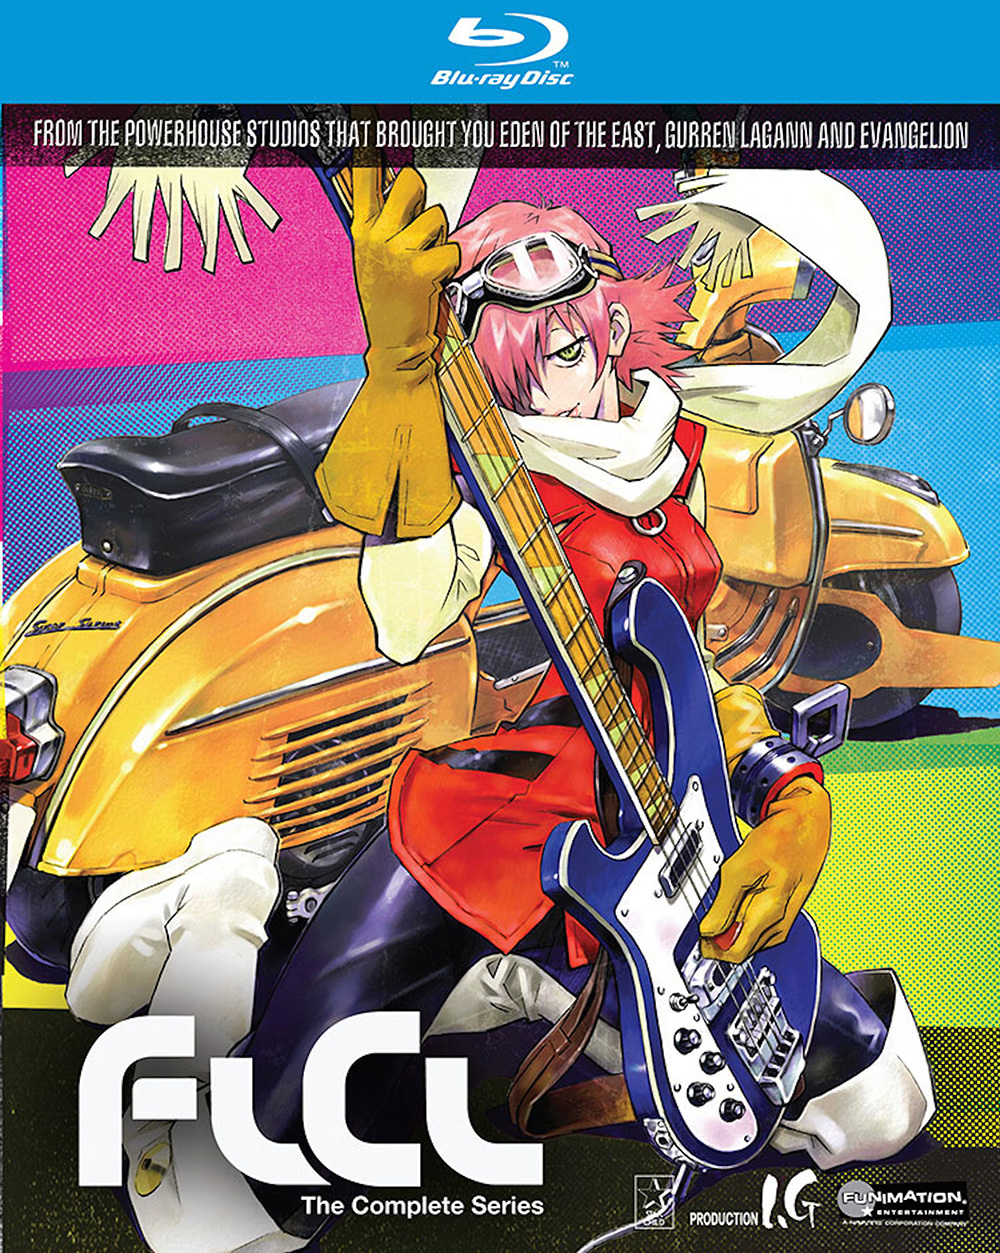 FLCL-Blu-ray-Cover